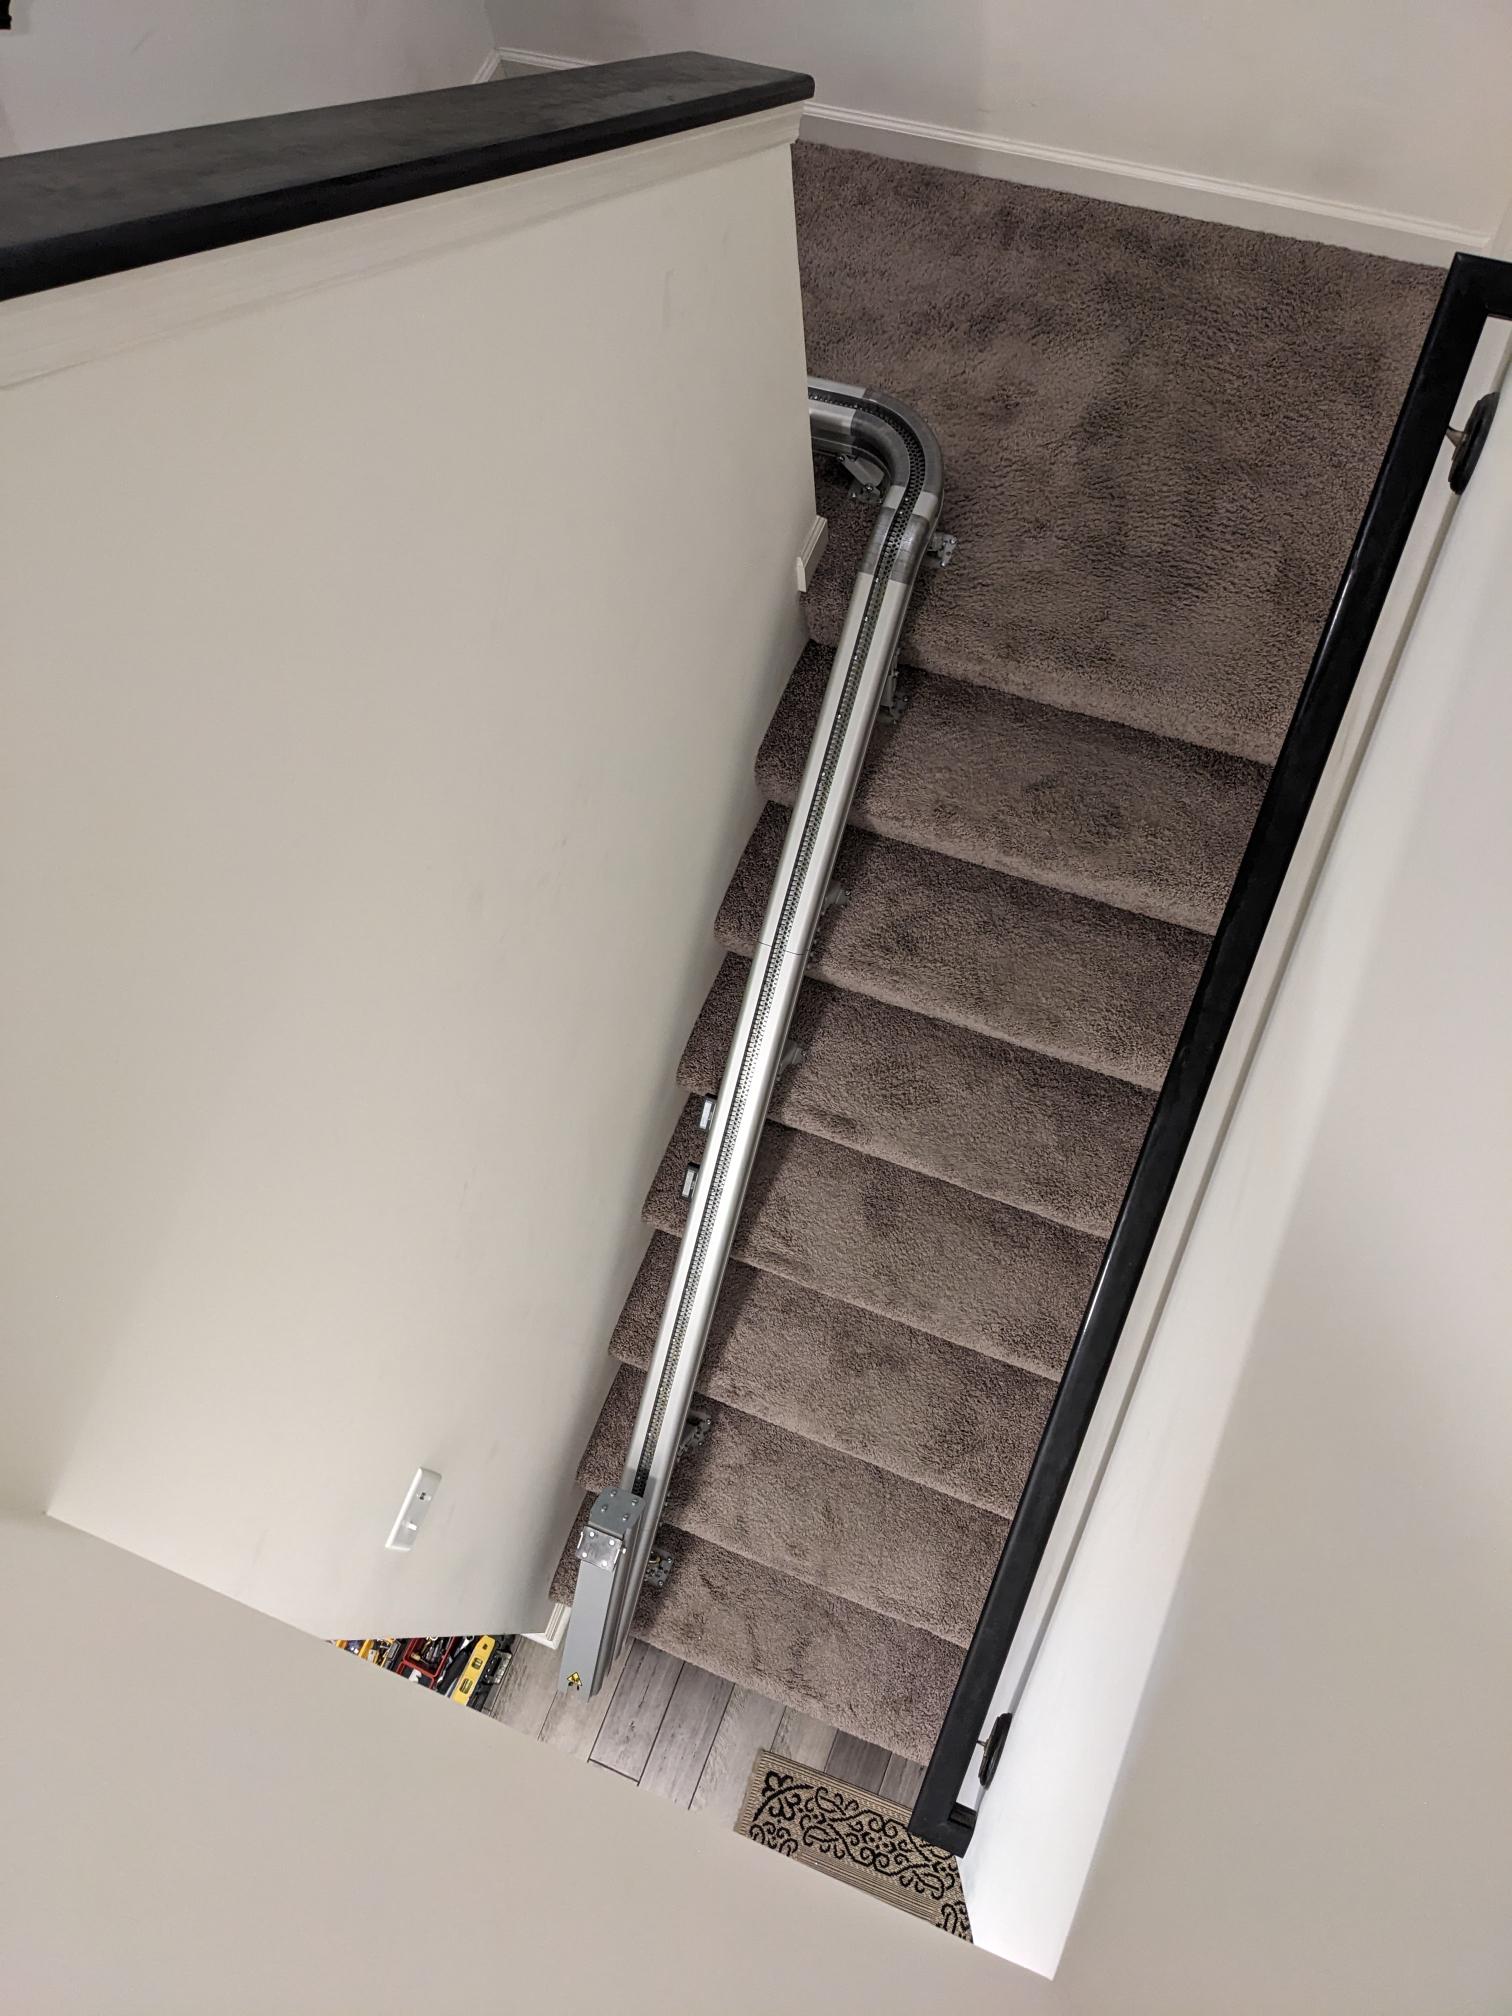 Up Stairlift by Harmar customer image.